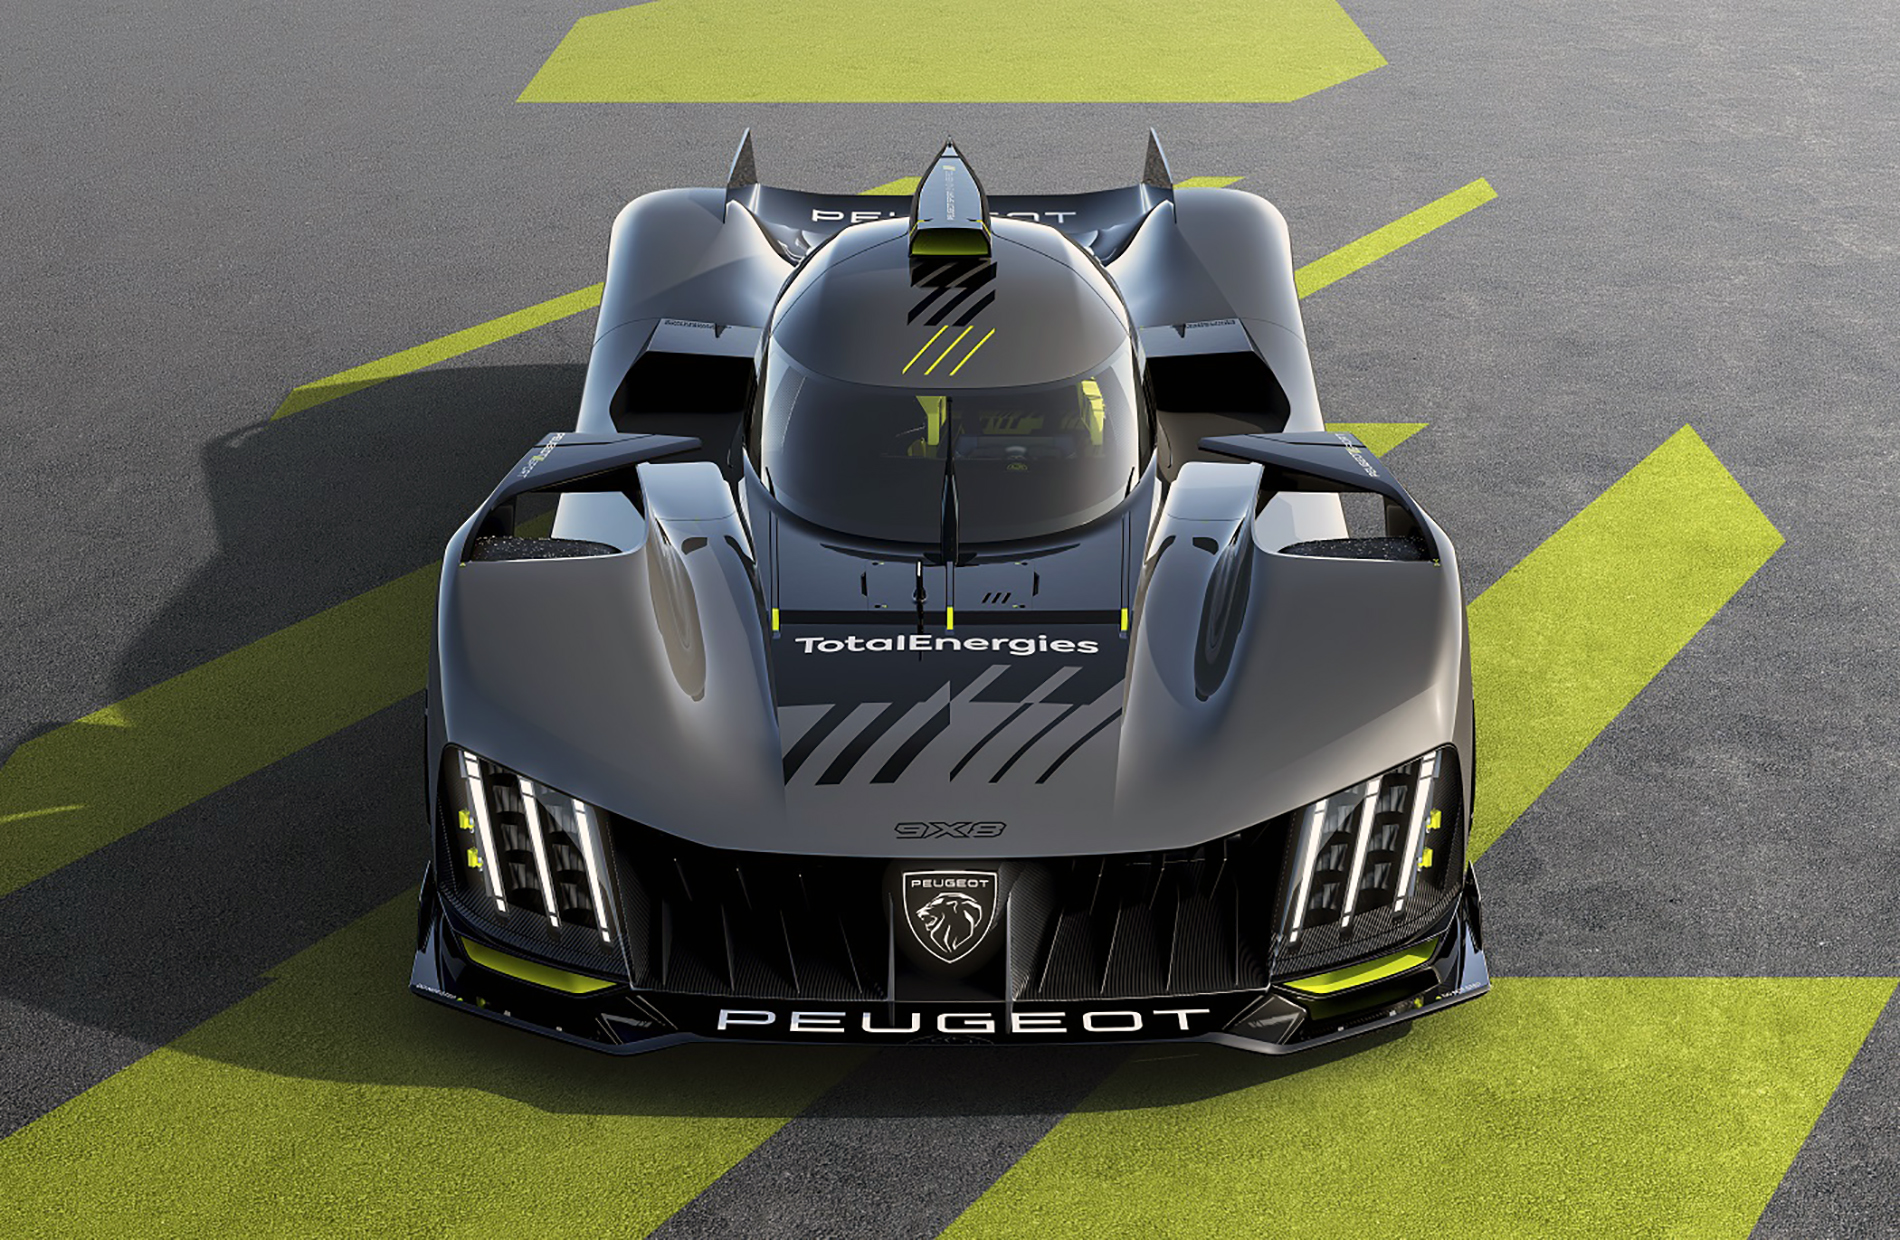 Nowy Peugeot 9x8 Hypercar – Designed to Race